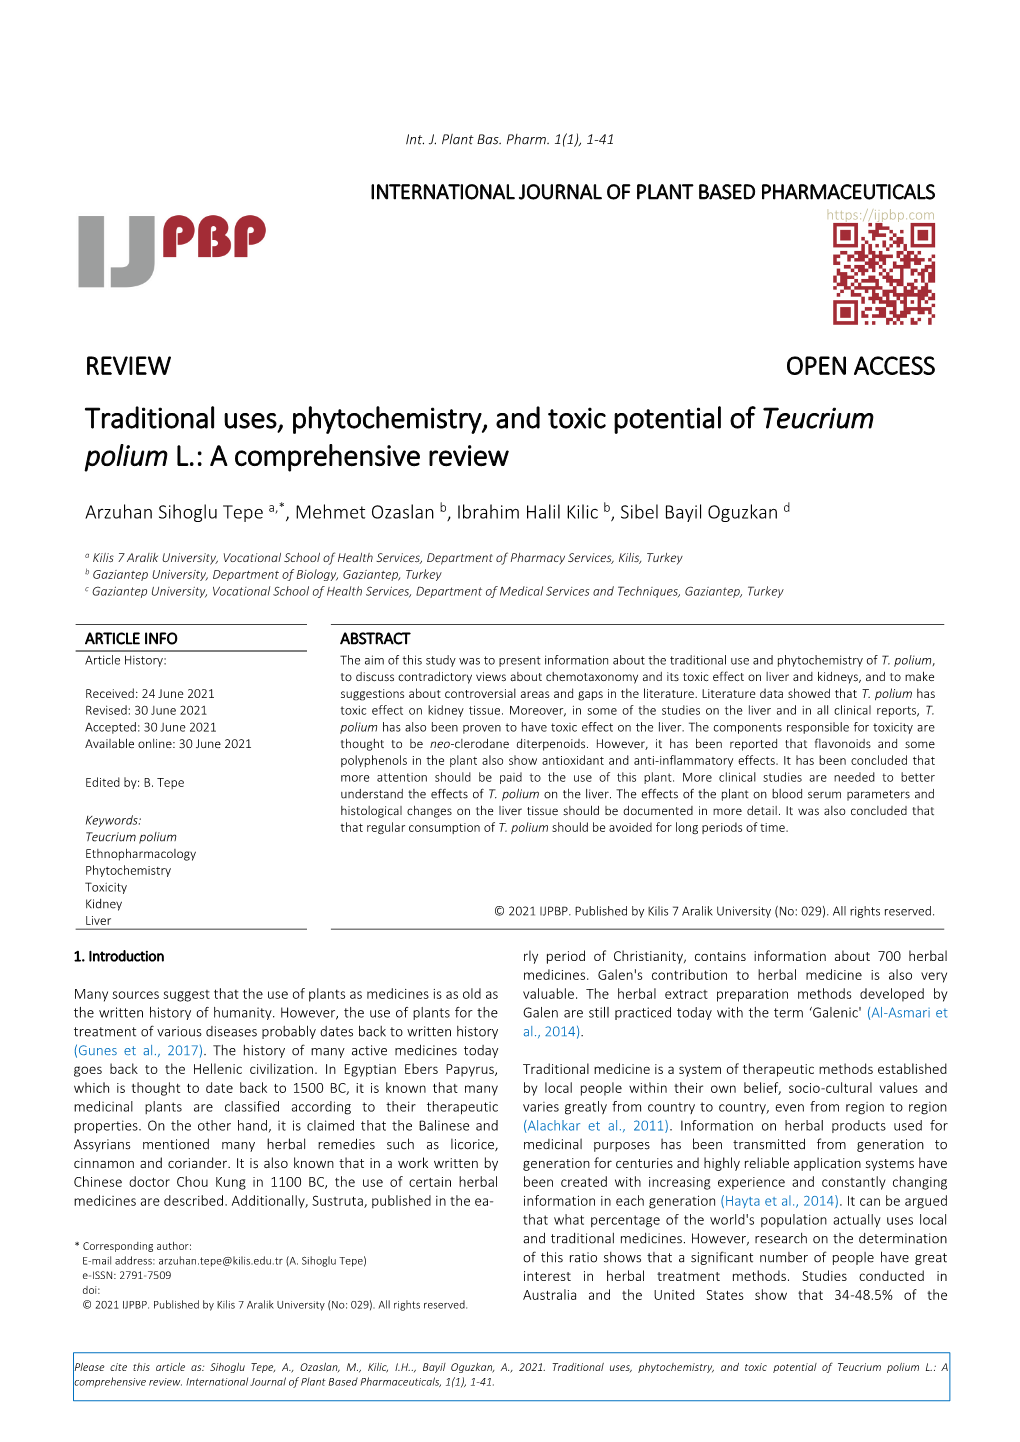 Traditional Uses, Phytochemistry, and Toxic Potential of Teucrium Polium L.: a Comprehensive Review